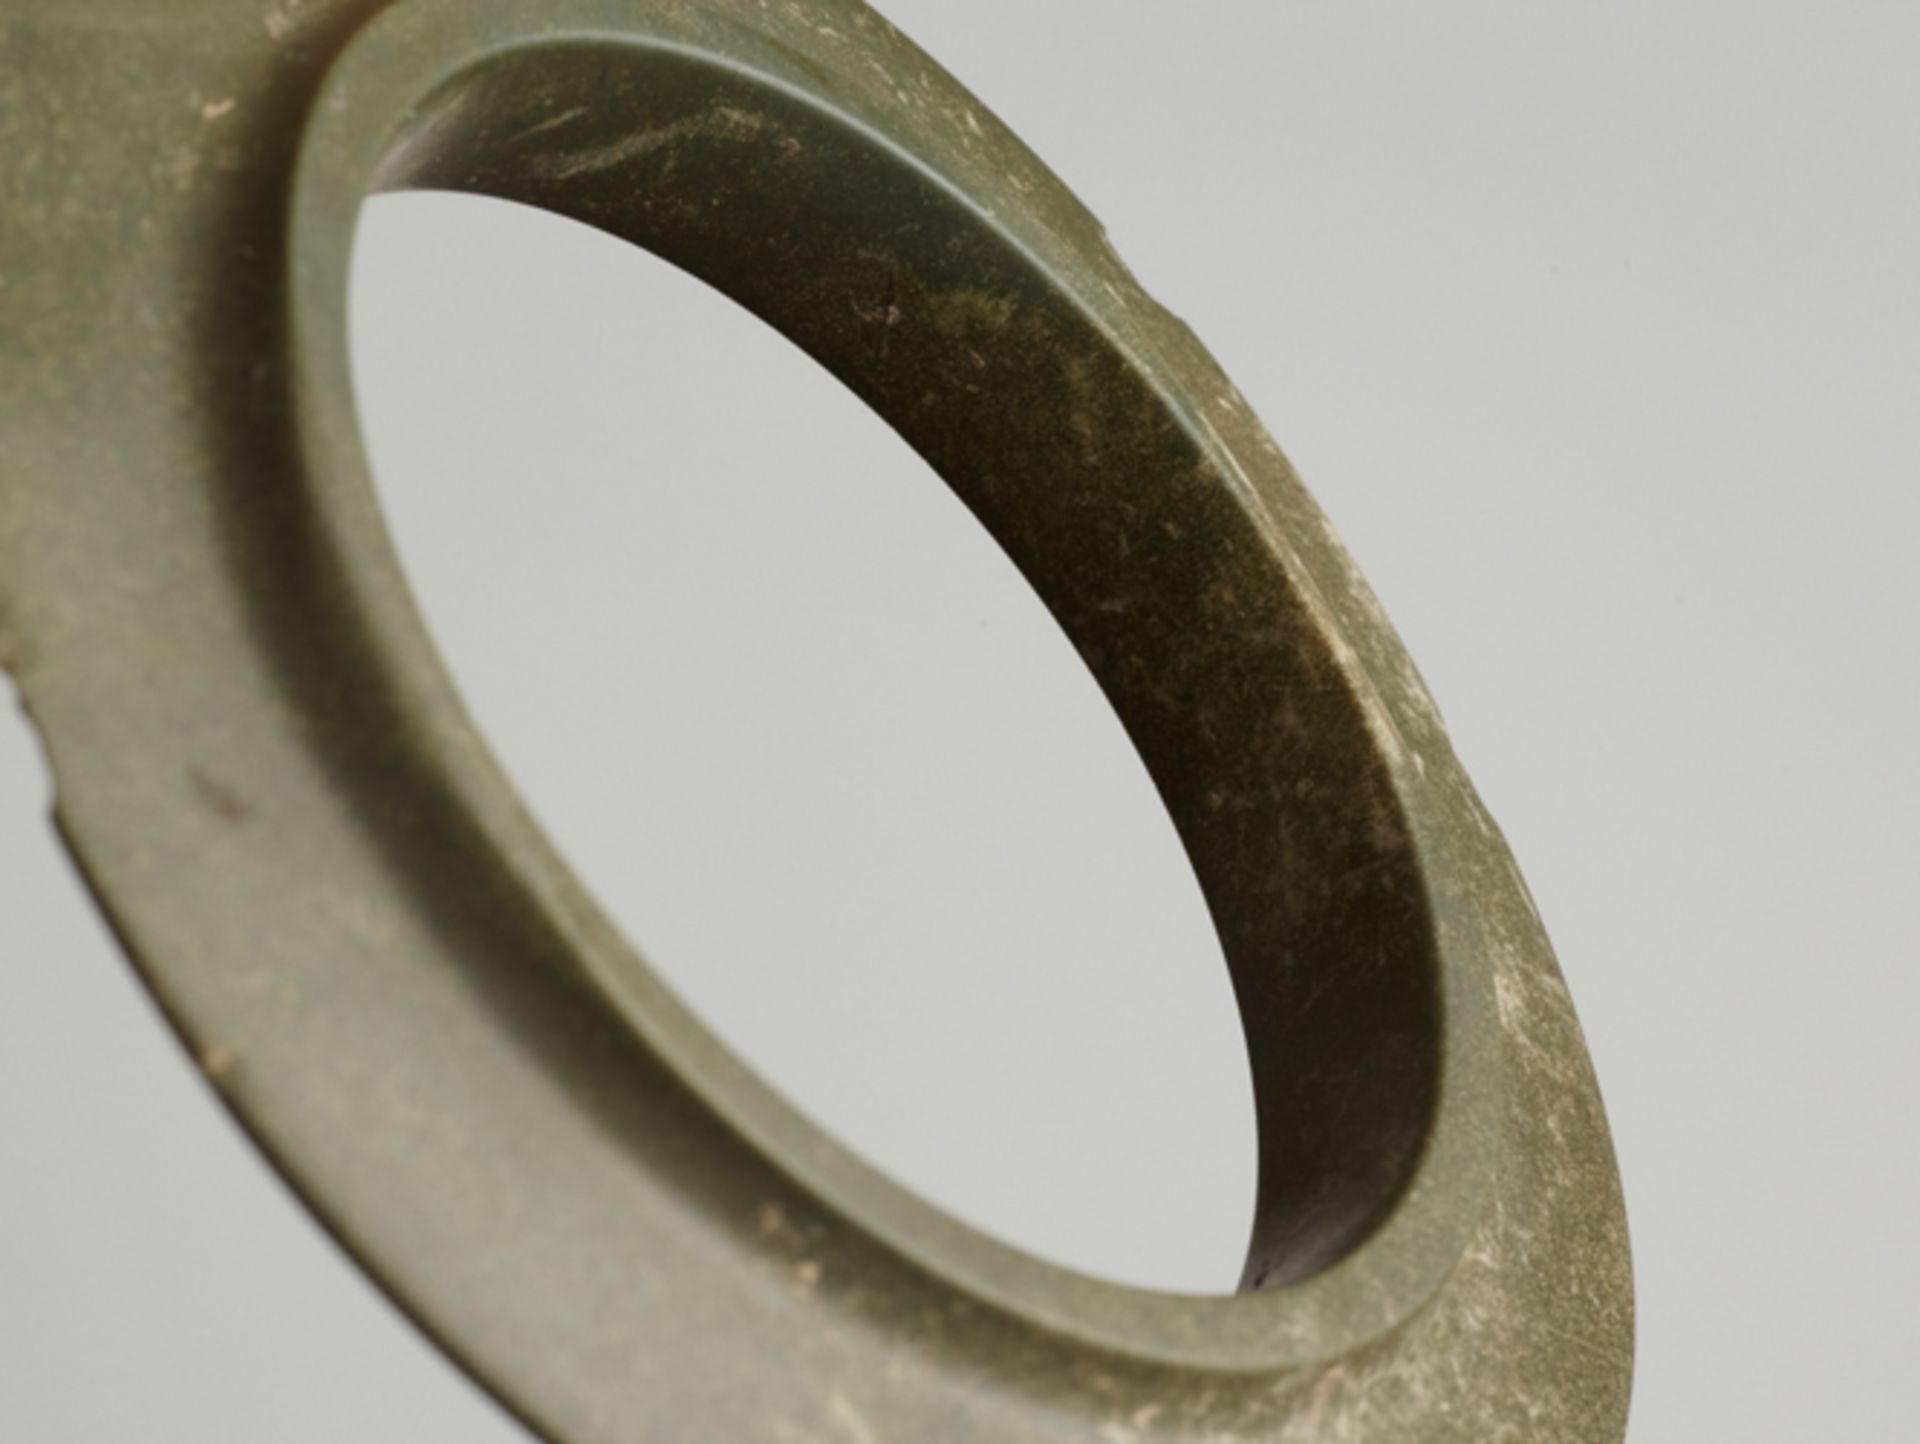 PAIR OF COLLARED YUAN RINGSJade. China, Late Shang dynasty, c. 1200 BCThese two collared rings are - Image 6 of 8